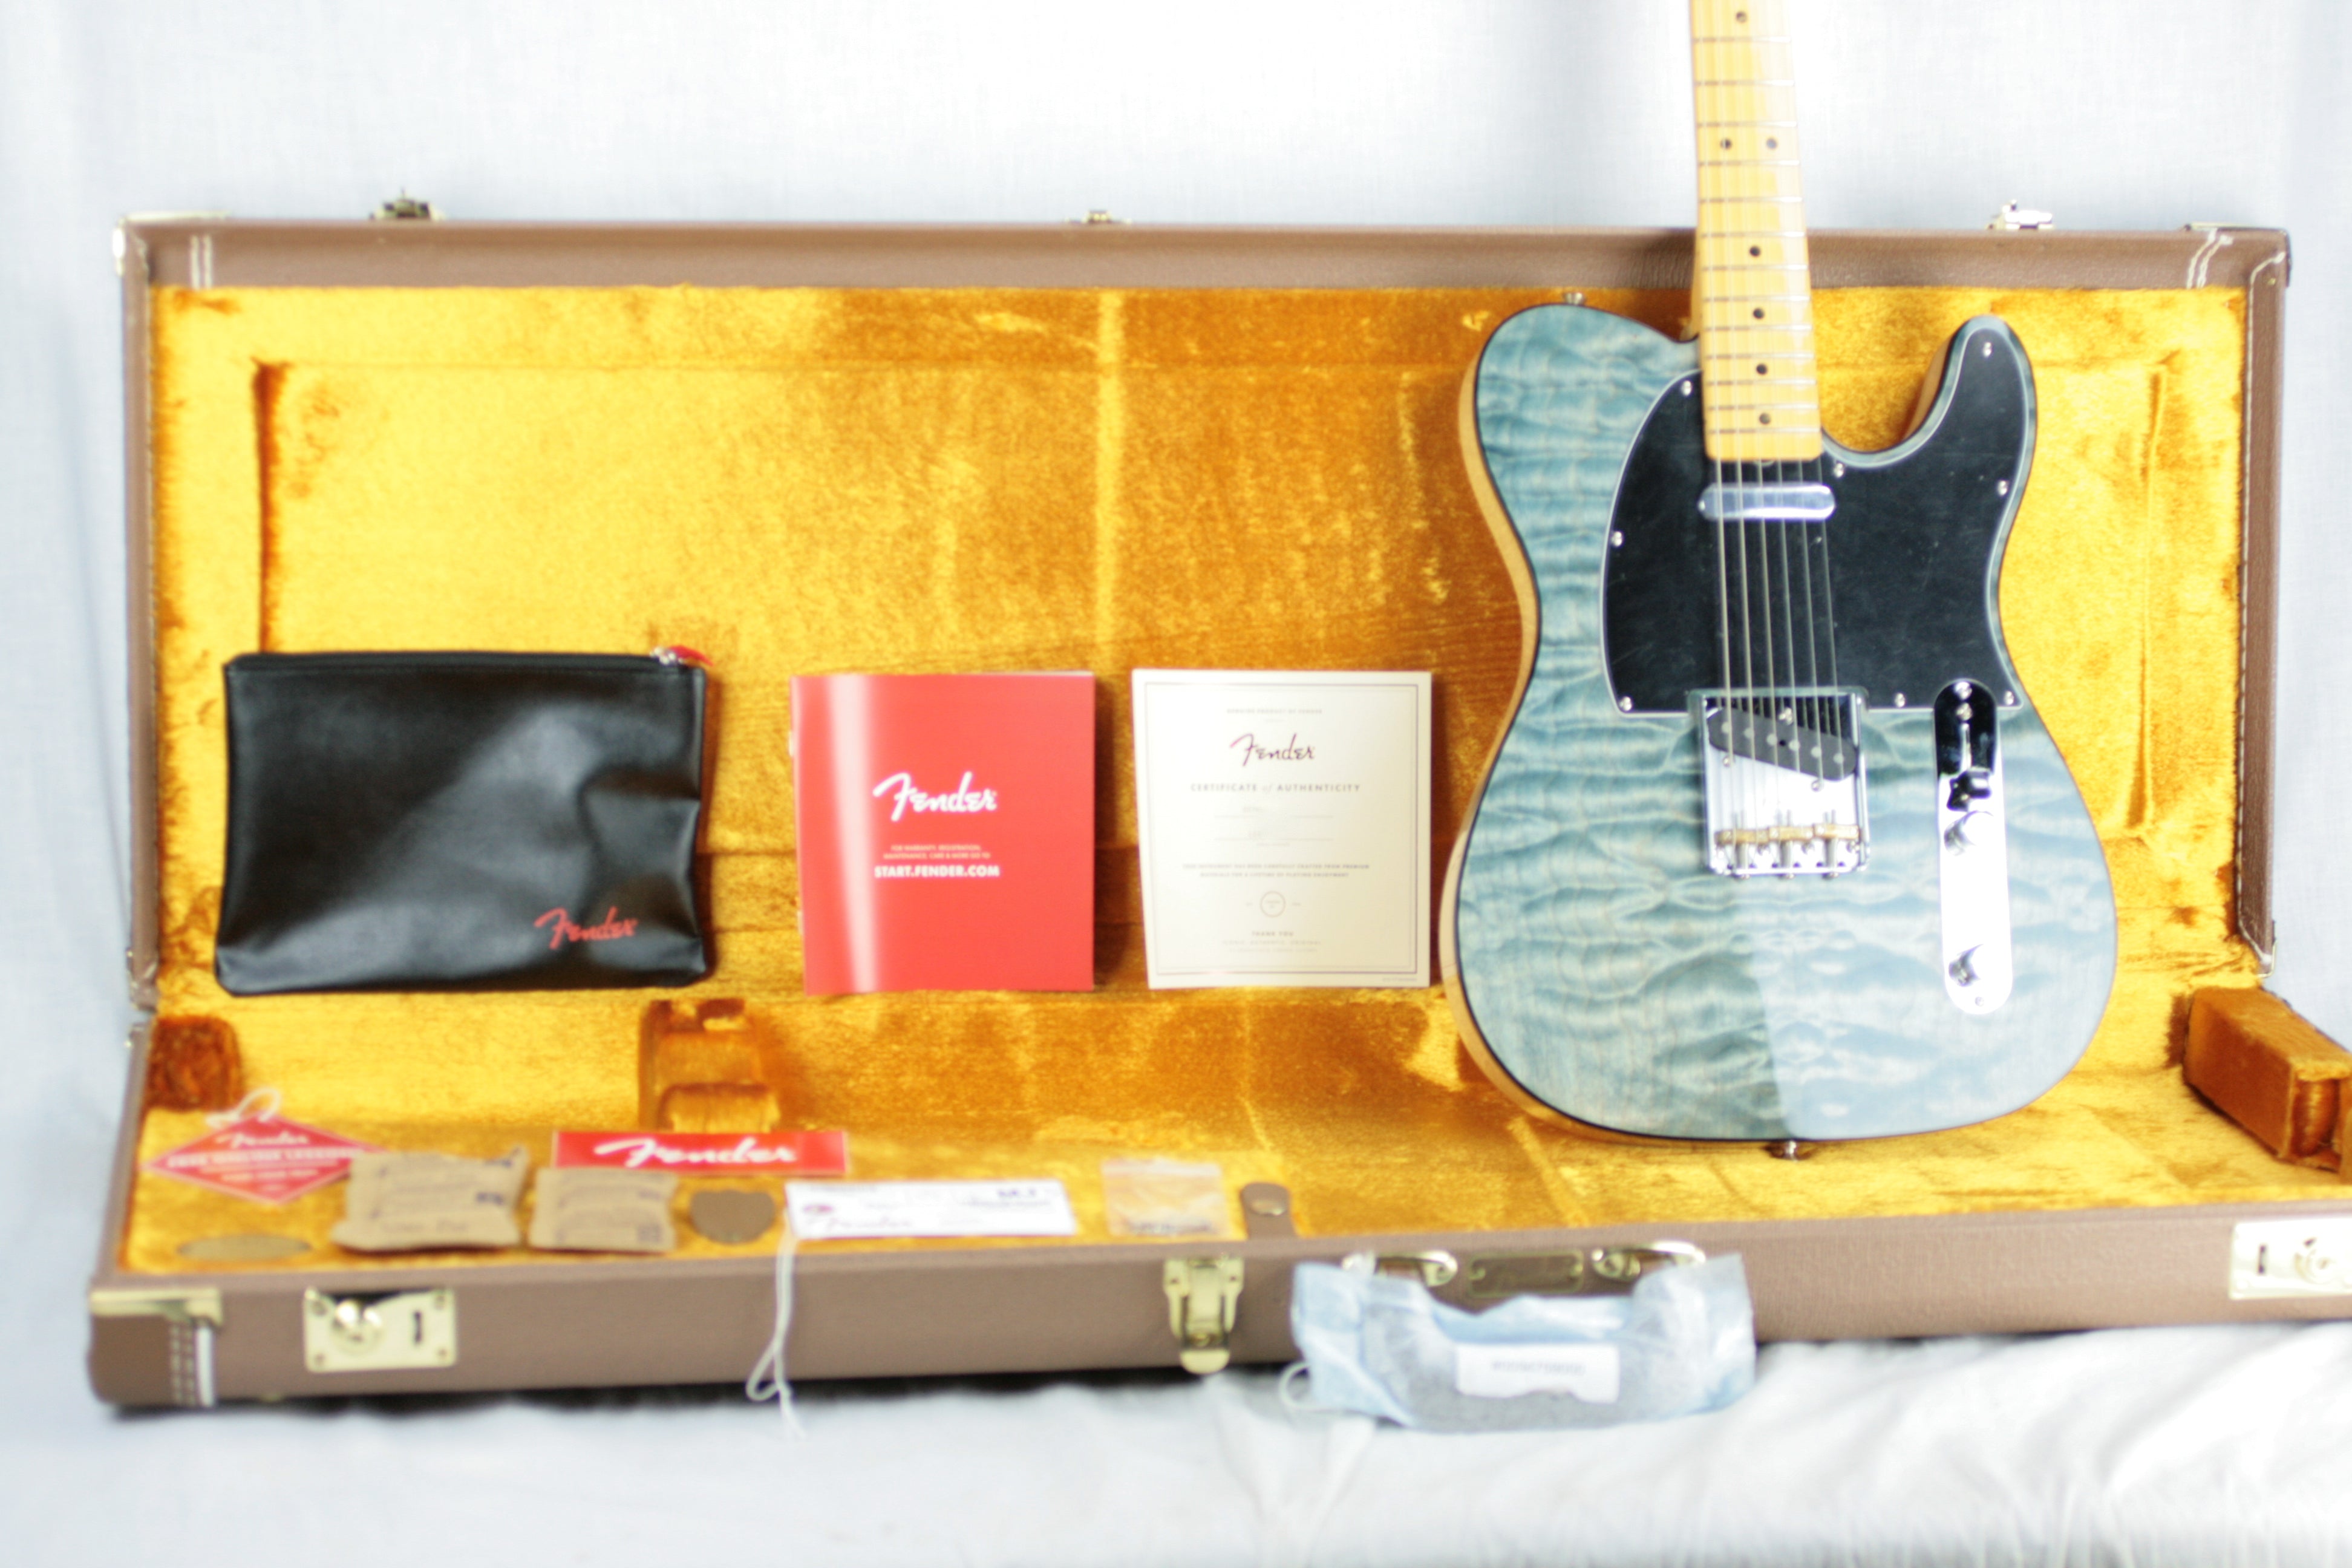 *SOLD*  2019 Fender '60s American Rarities Quilt Maple Top Telecaster USA Tele Limited Edition Blue Cloud